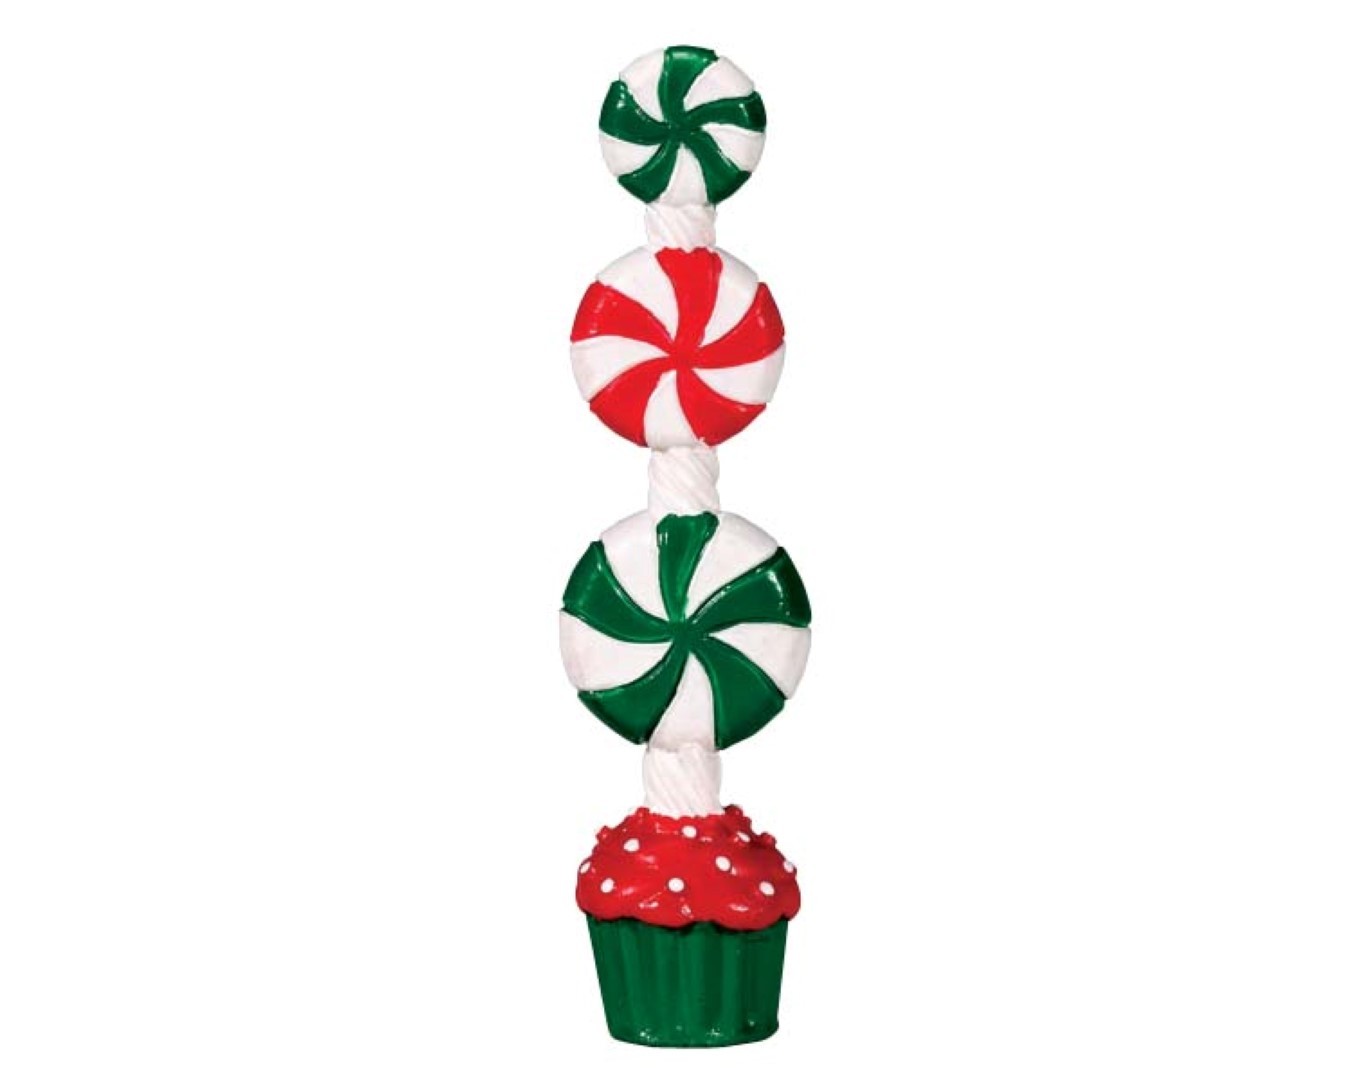 LEMAX Peppermint candy topiary - 